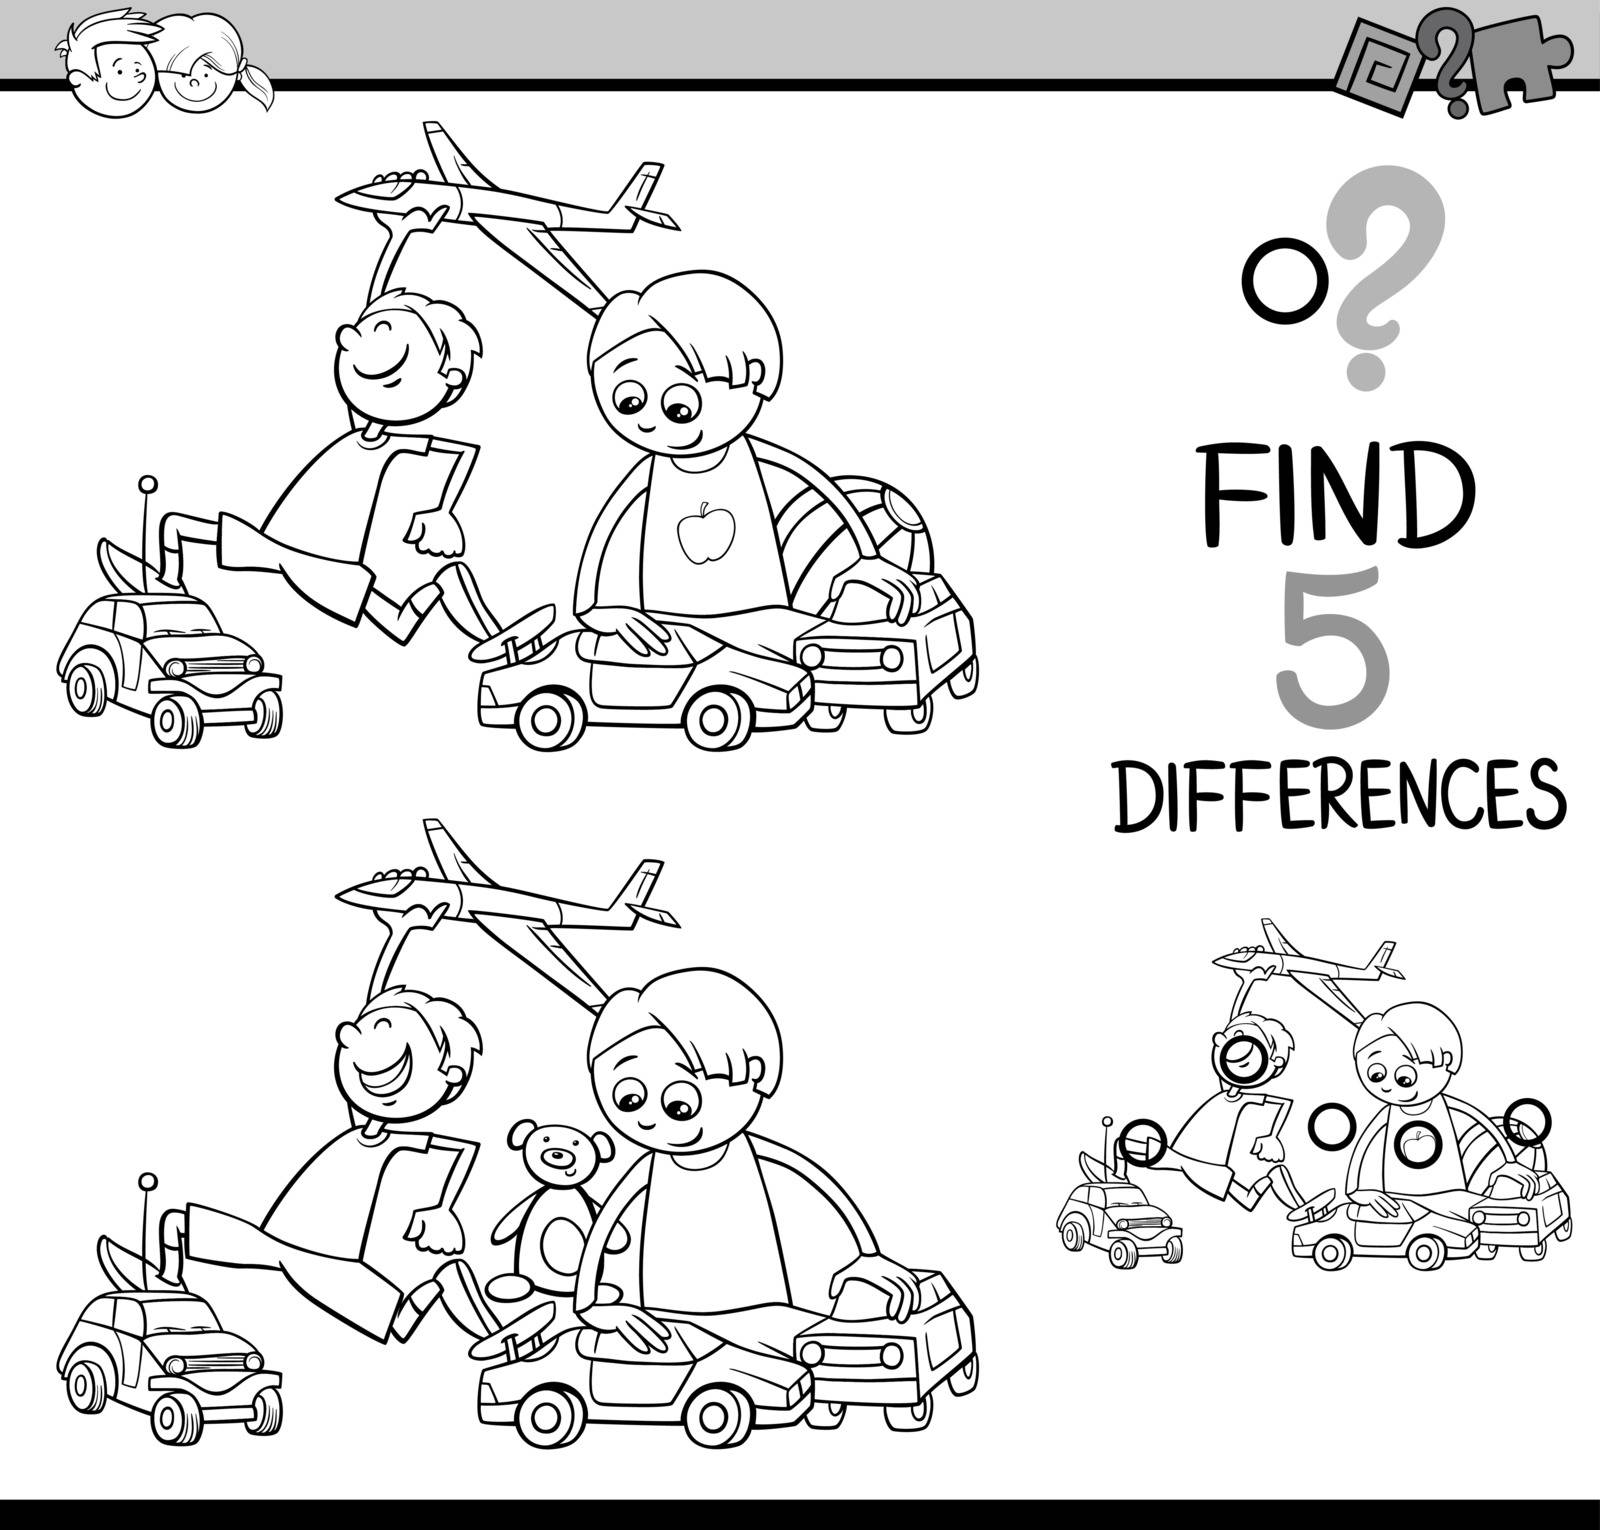 task of differences coloring book by izakowski